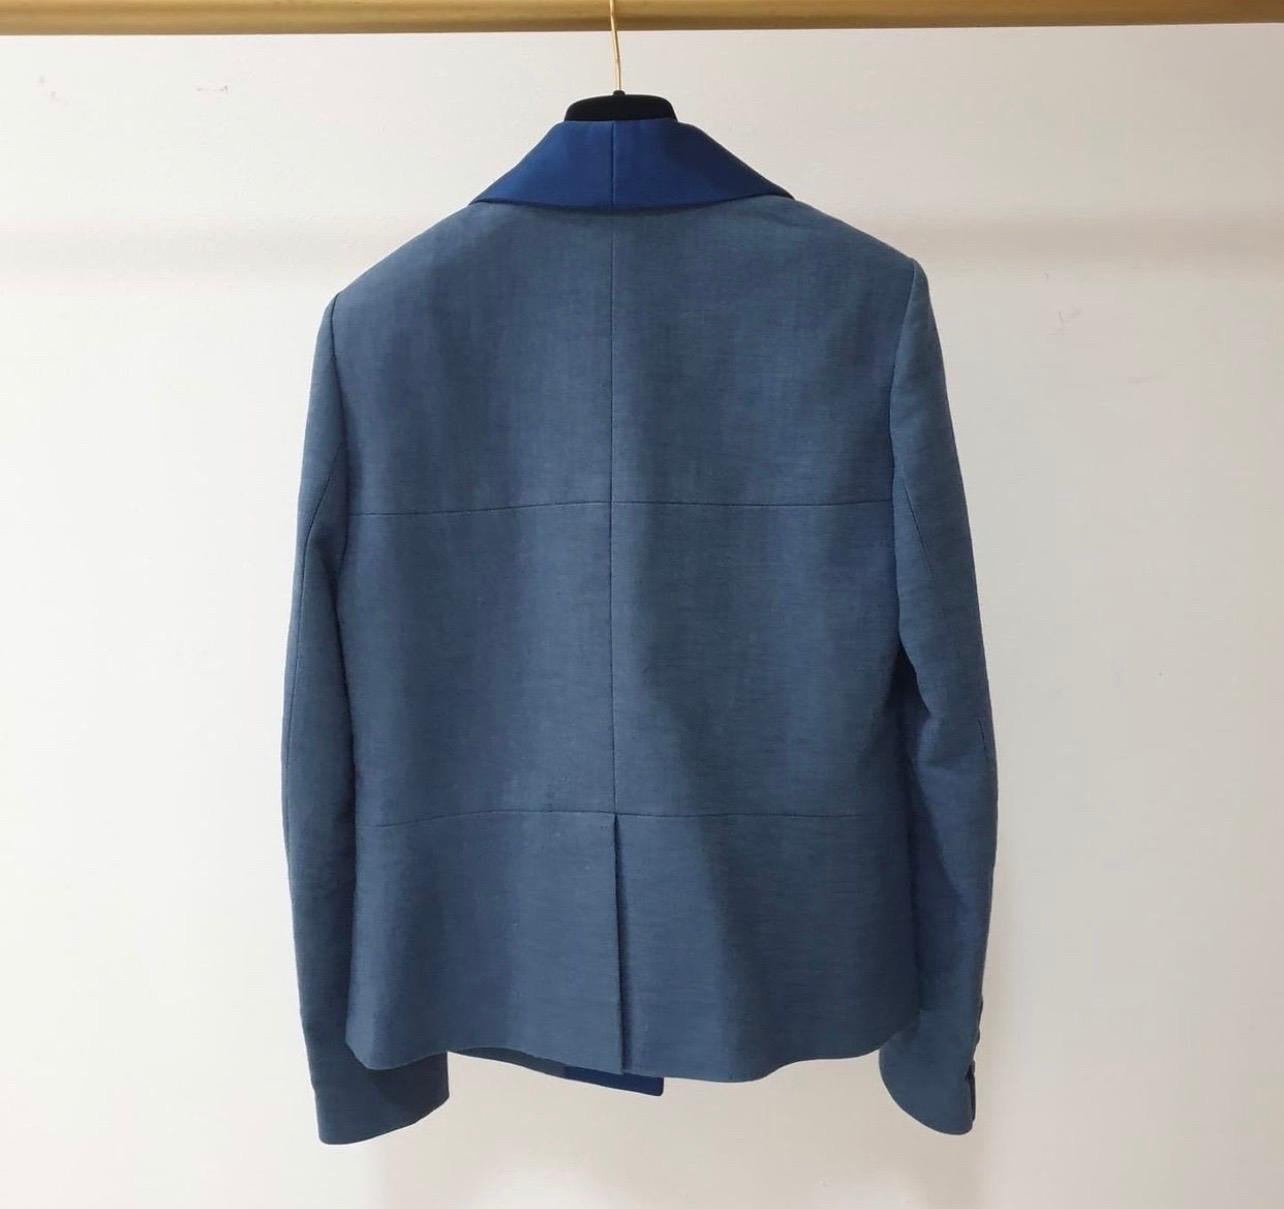 CHANEL 17C Coco Cuba Runway Blazer Jacket with Silk Satin Collar in Blue, 
Size 40 FR. 
With camellia print silk lining and chain weighted hem.
Condition is very good.
For buyers from EU we can provide shipping from Poland. Please demand if you need.